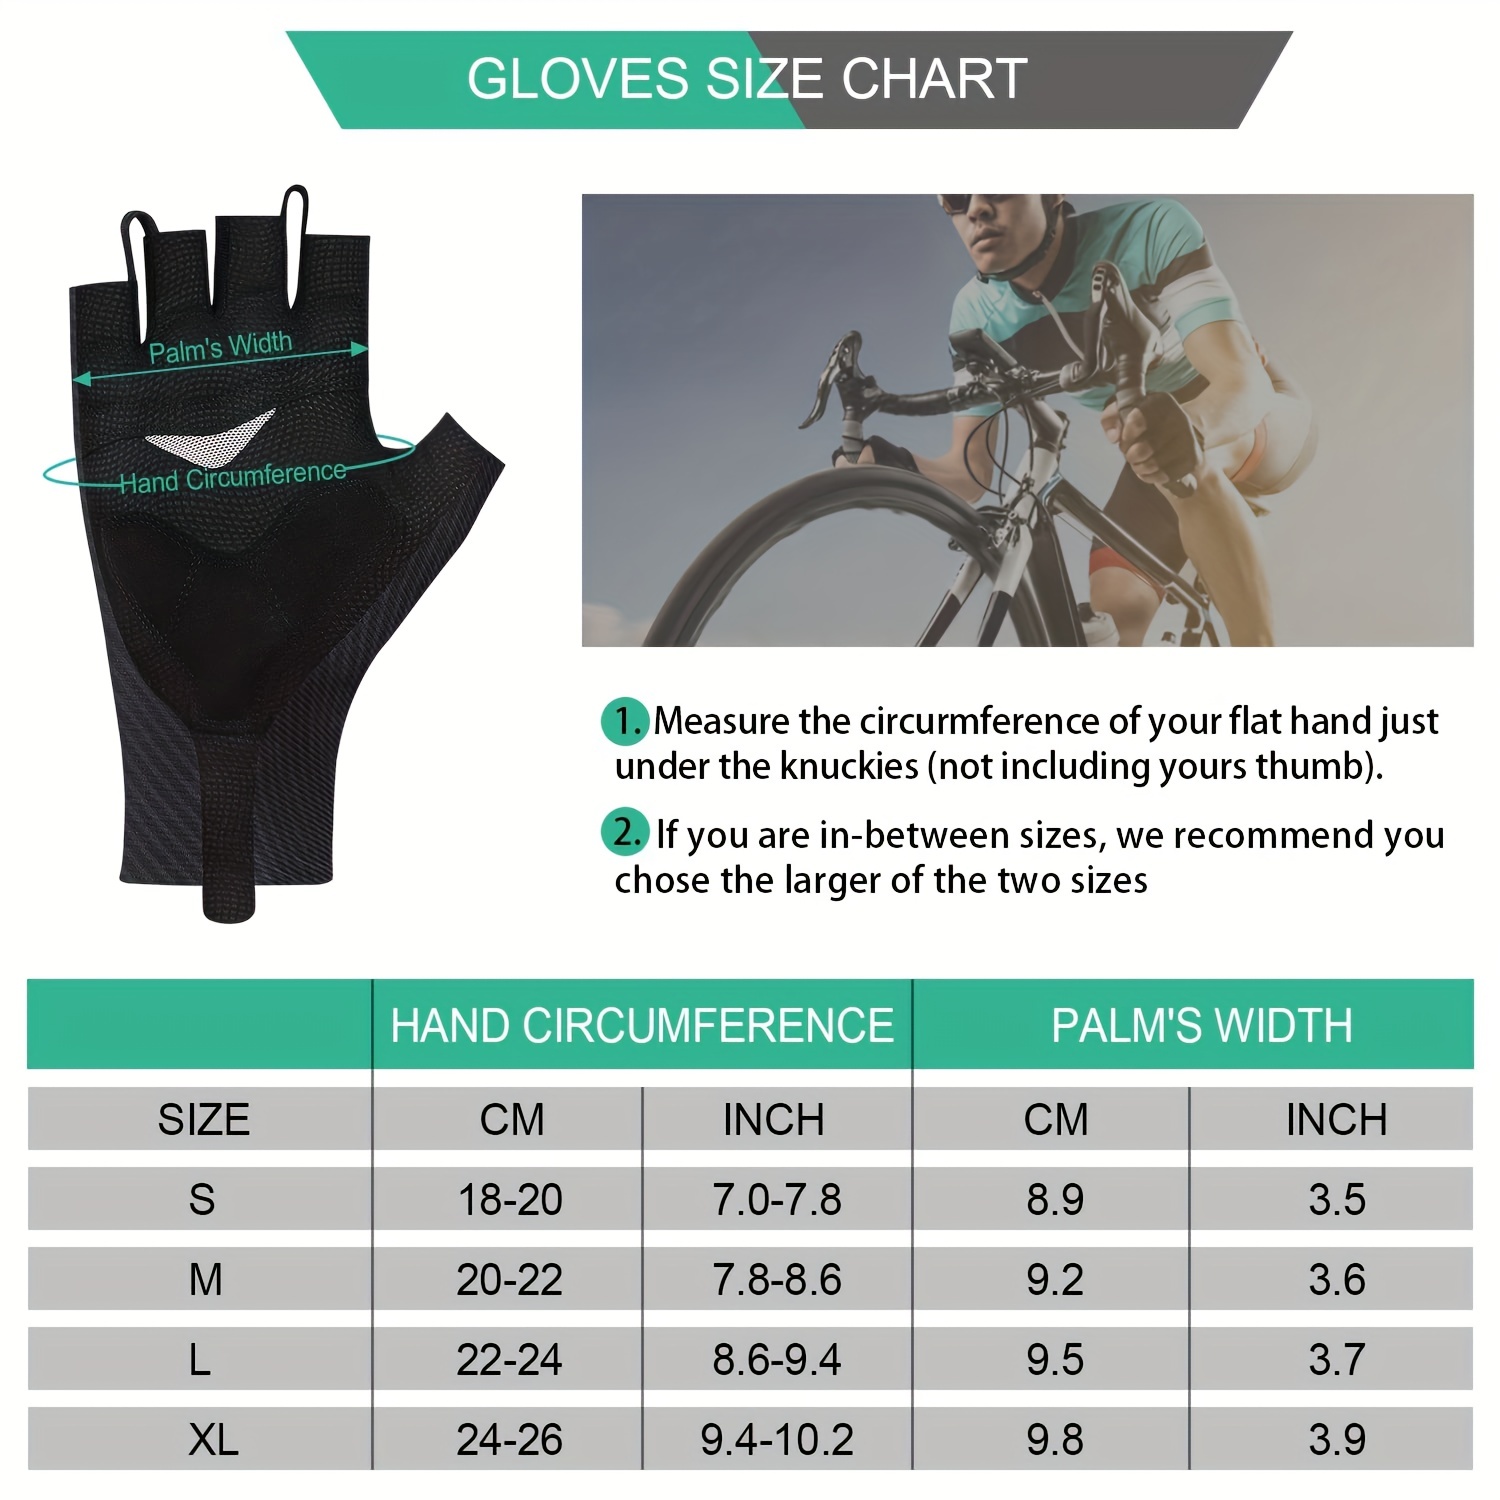 Souke Sports Cycling Bike Gloves Padded Half Finger Bicycle Gloves